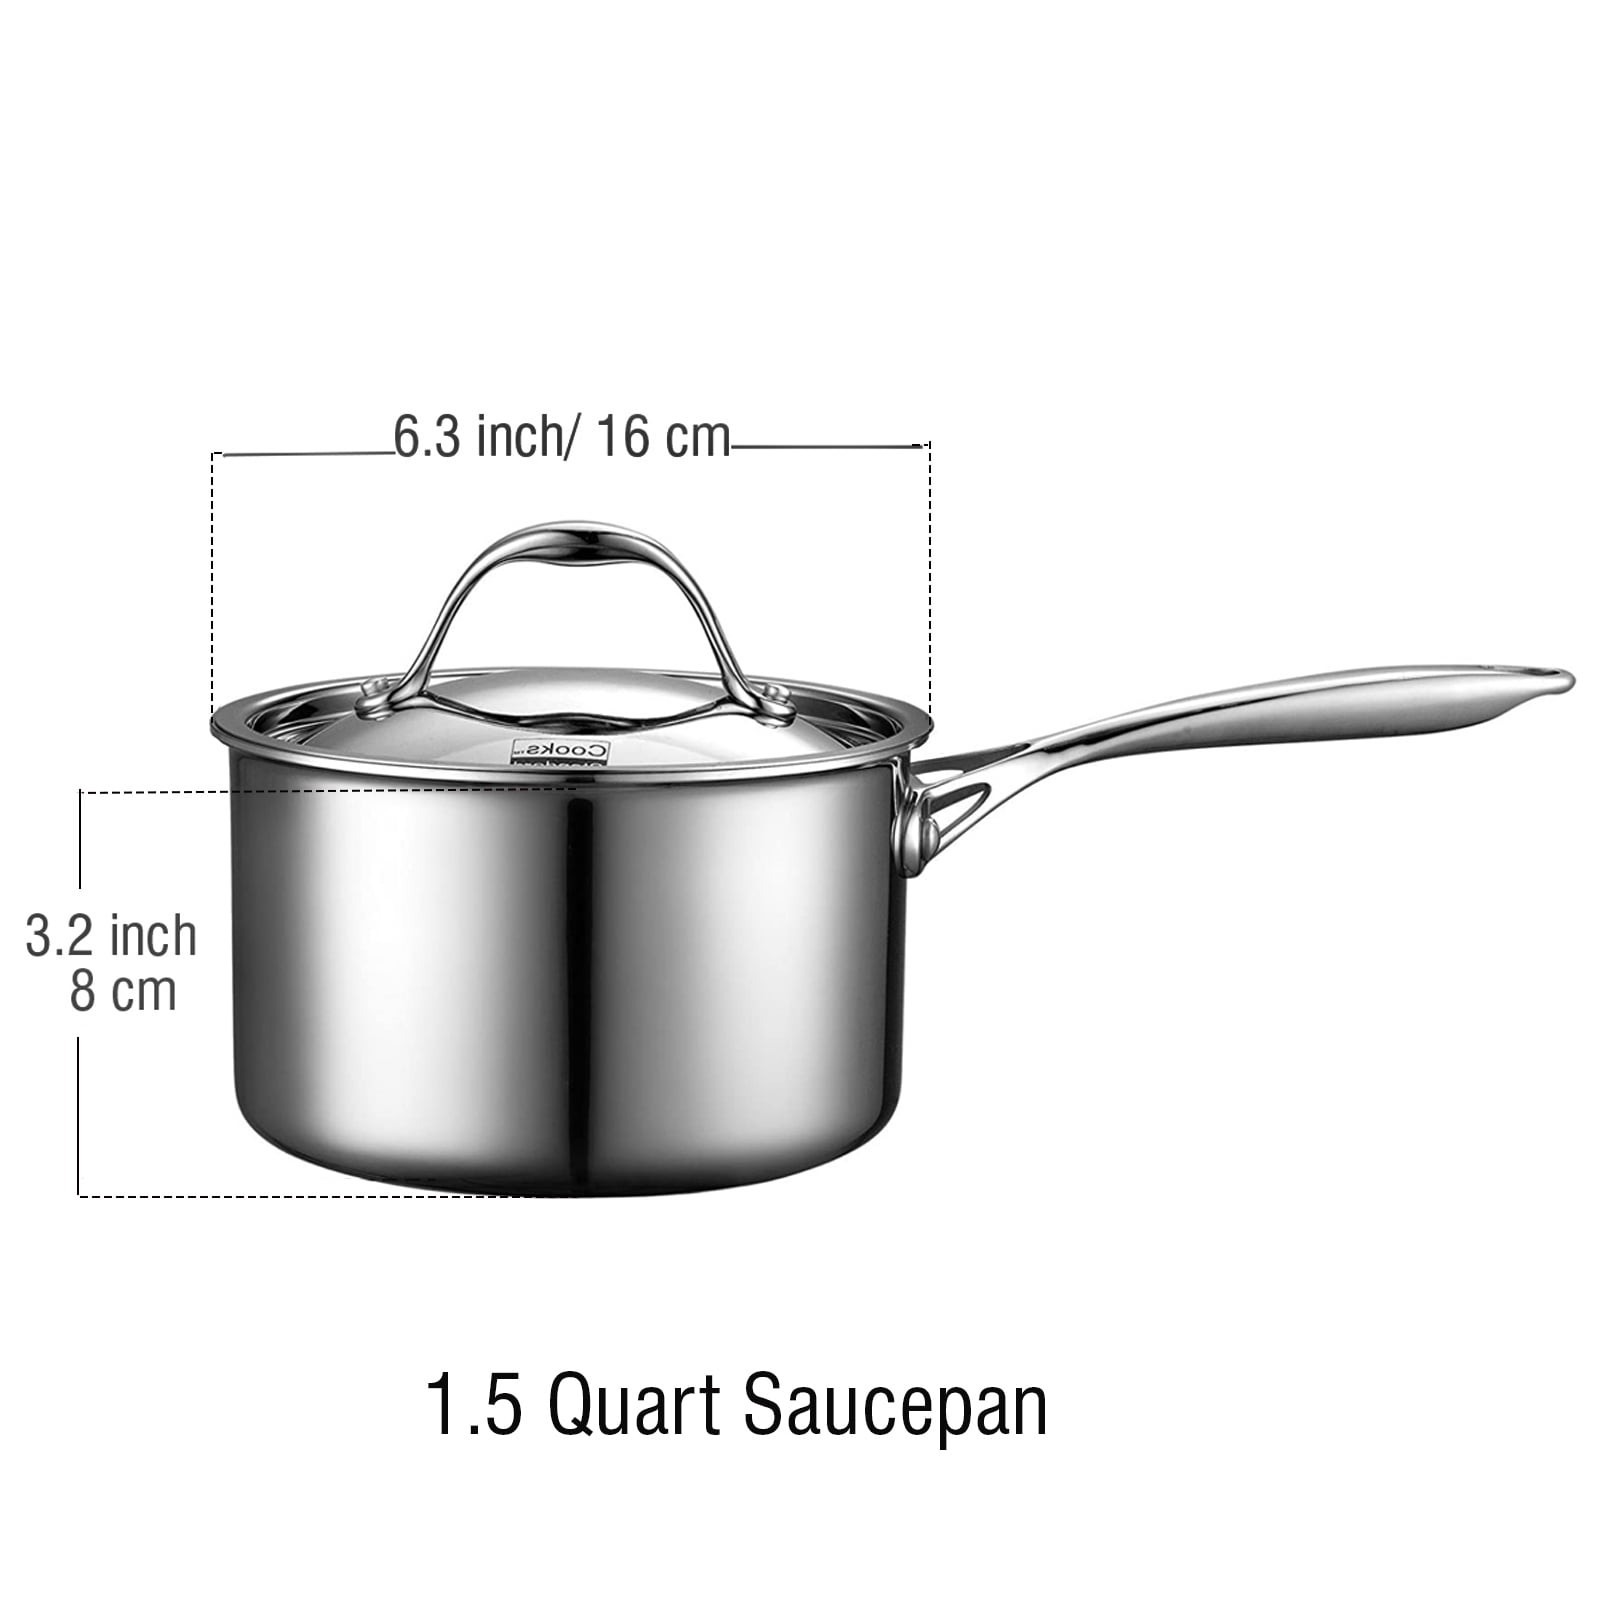 Classic Cuisine HW031046 1.5 qt. Stainless Steel Double Boiler Saucepan with Lid